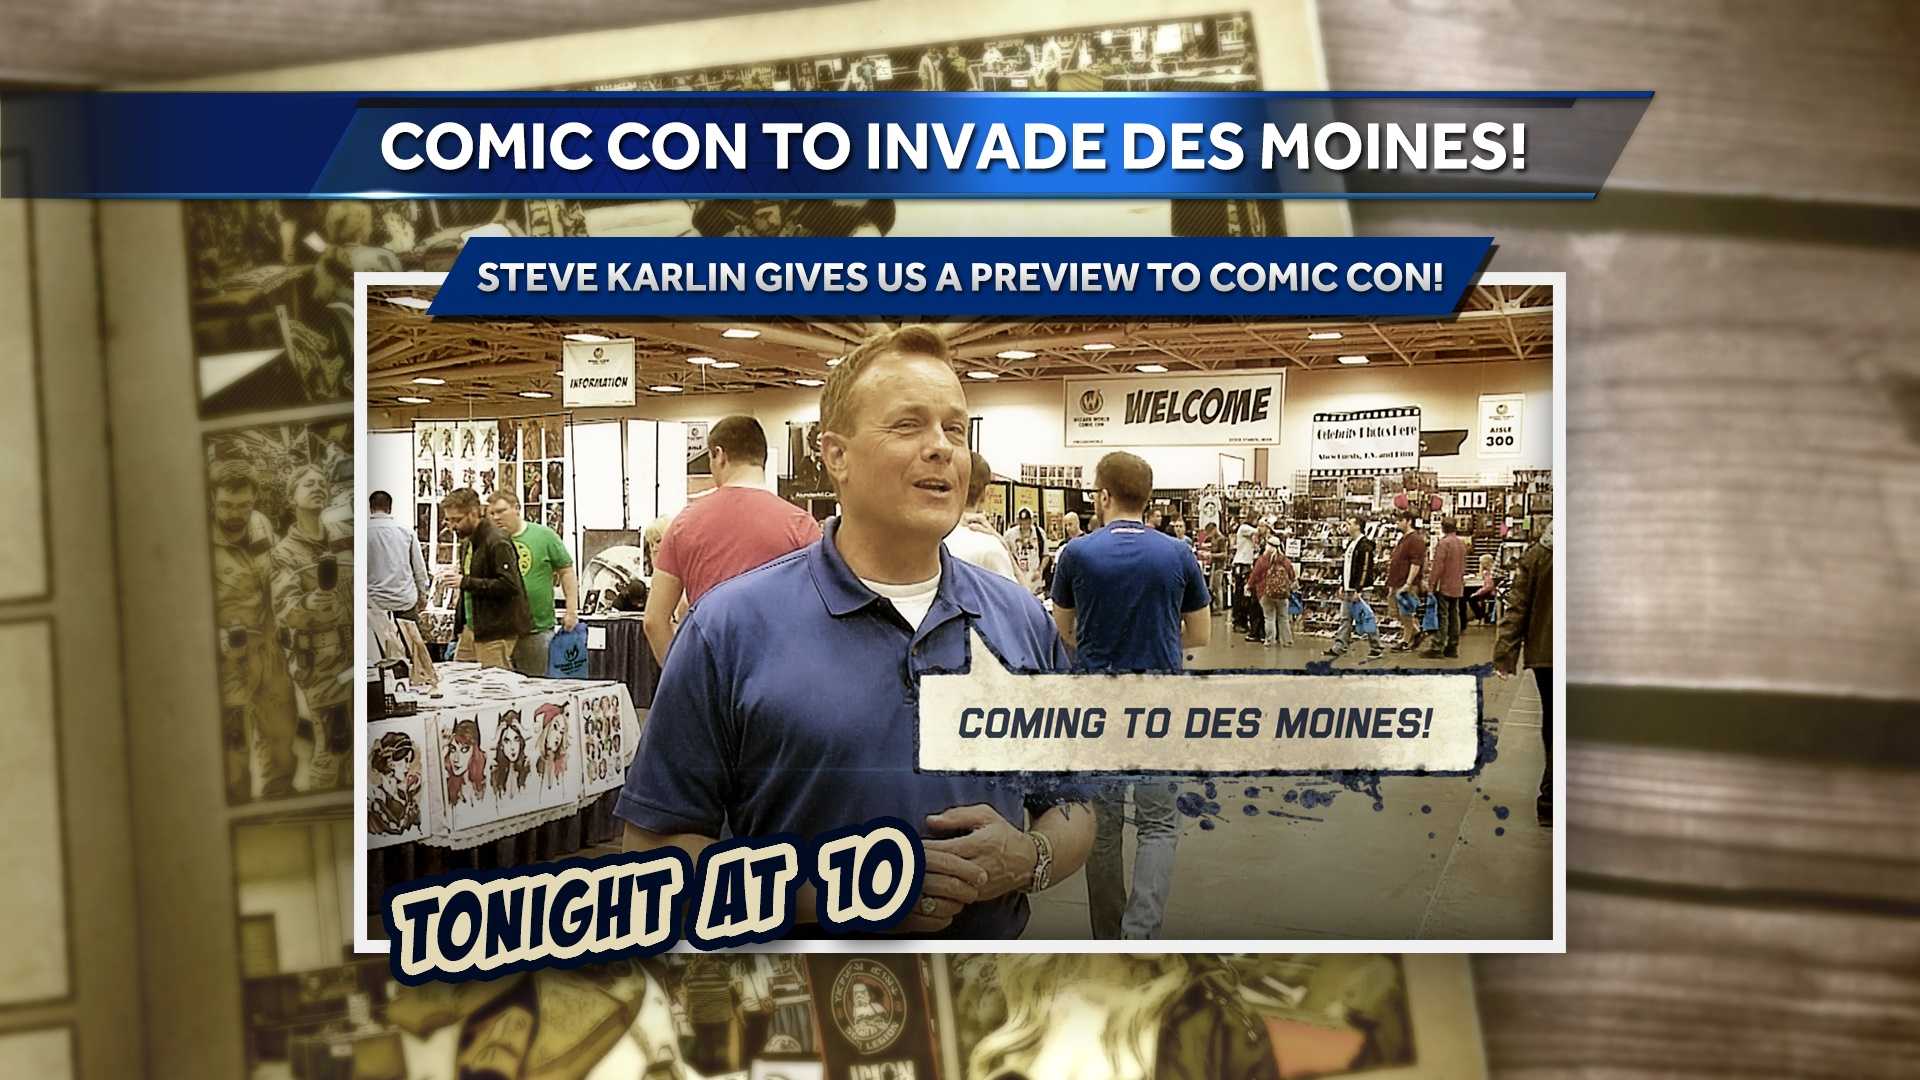 Things to do this weekend in Des Moines include Cy-Hawk game, Animate! con